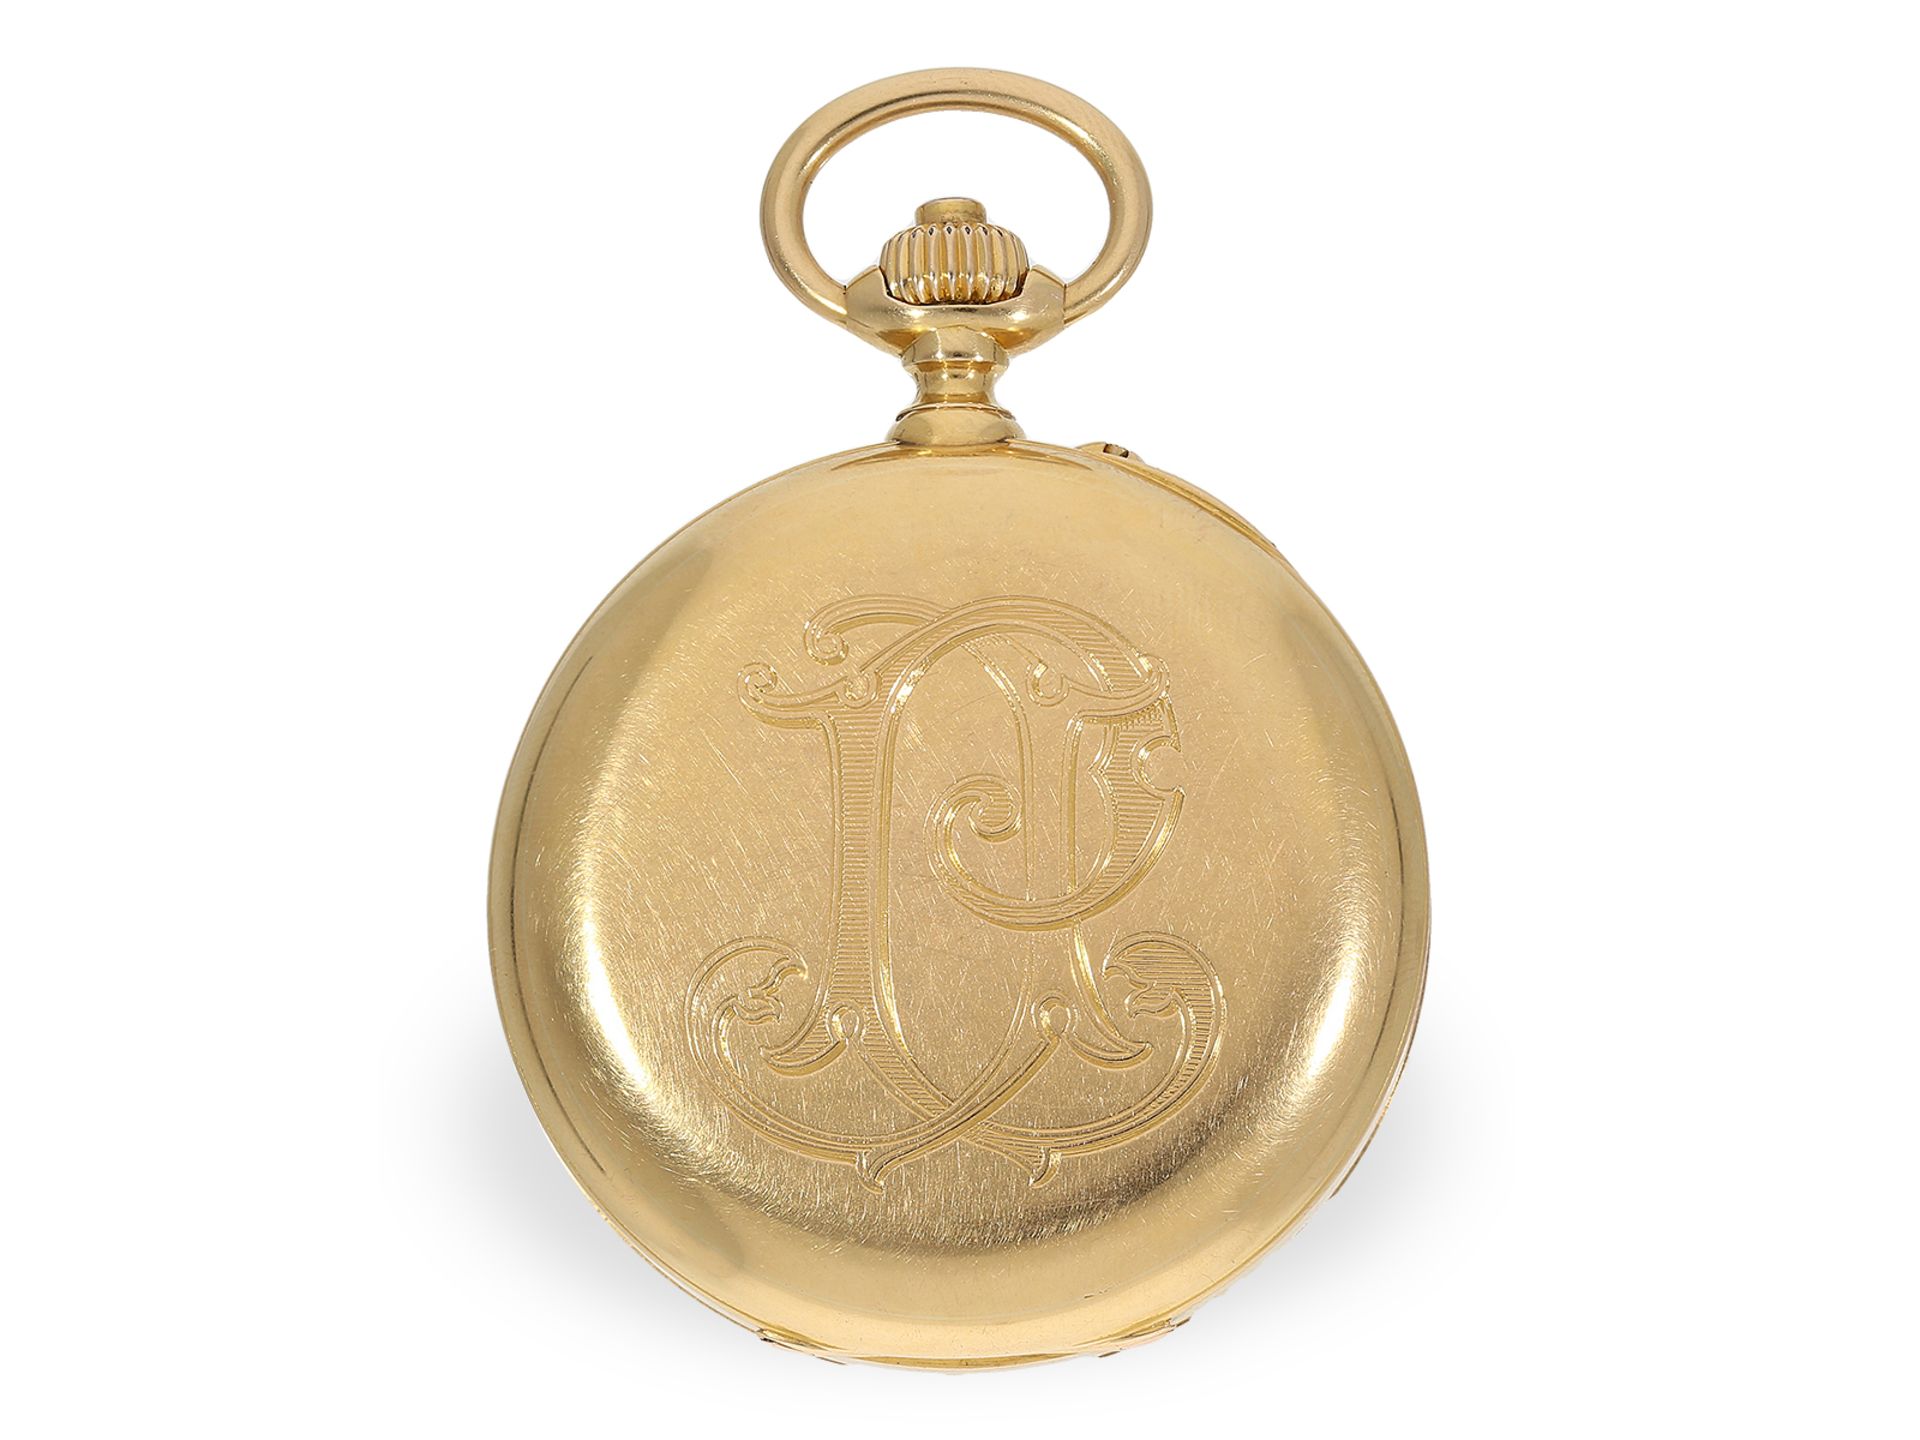 Pocket watch: important Le Roy chronometer with chronograph and central counter, No.57137-3601, ca. - Image 6 of 6